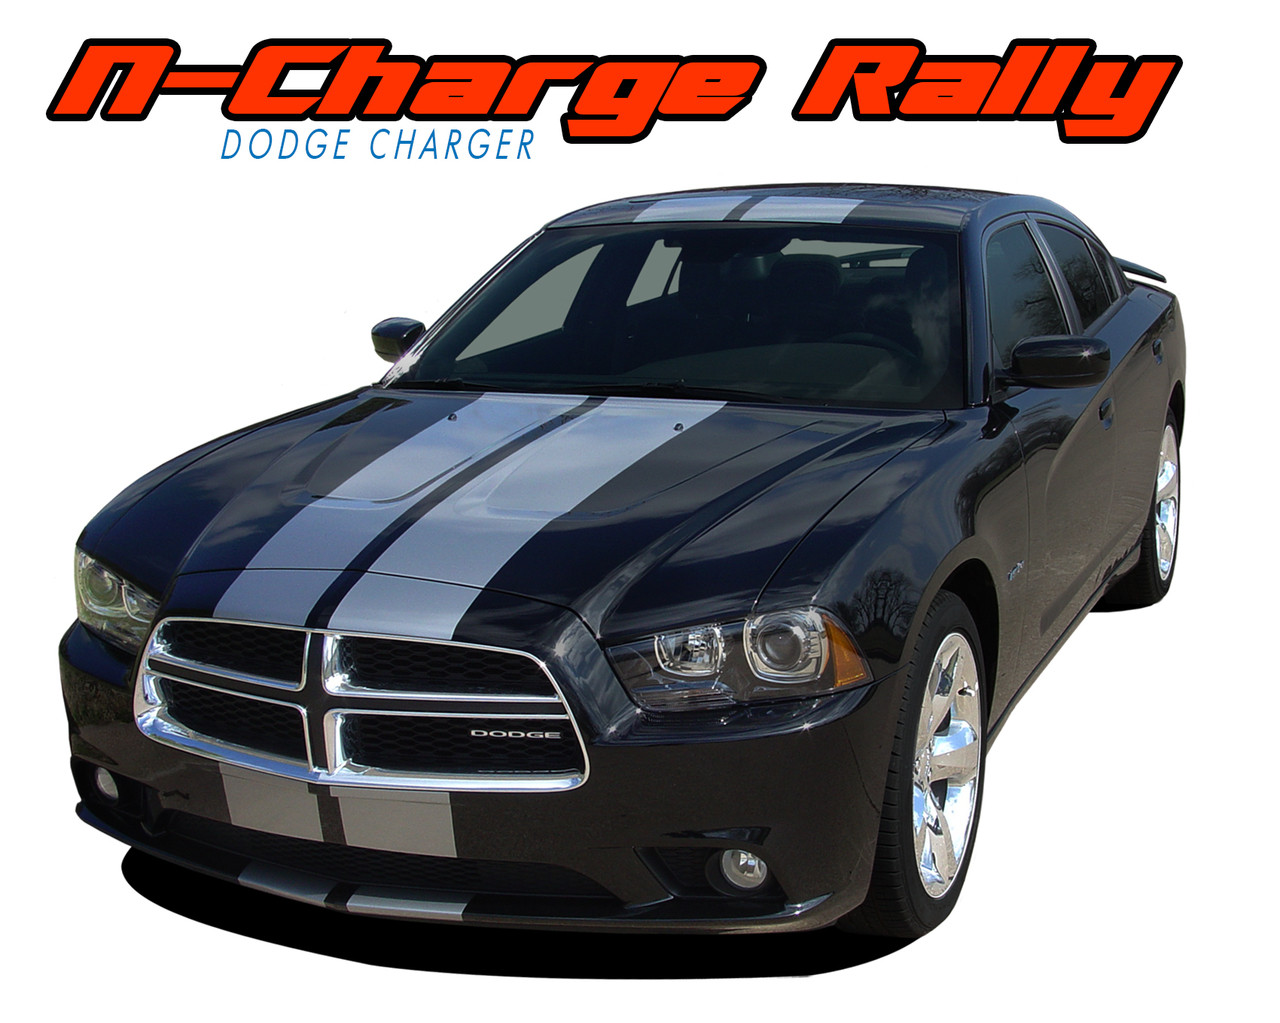 N-CHARGE RALLY | Dodge Charger Racing Stripes | Charger Decals | Vinyl  Graphics